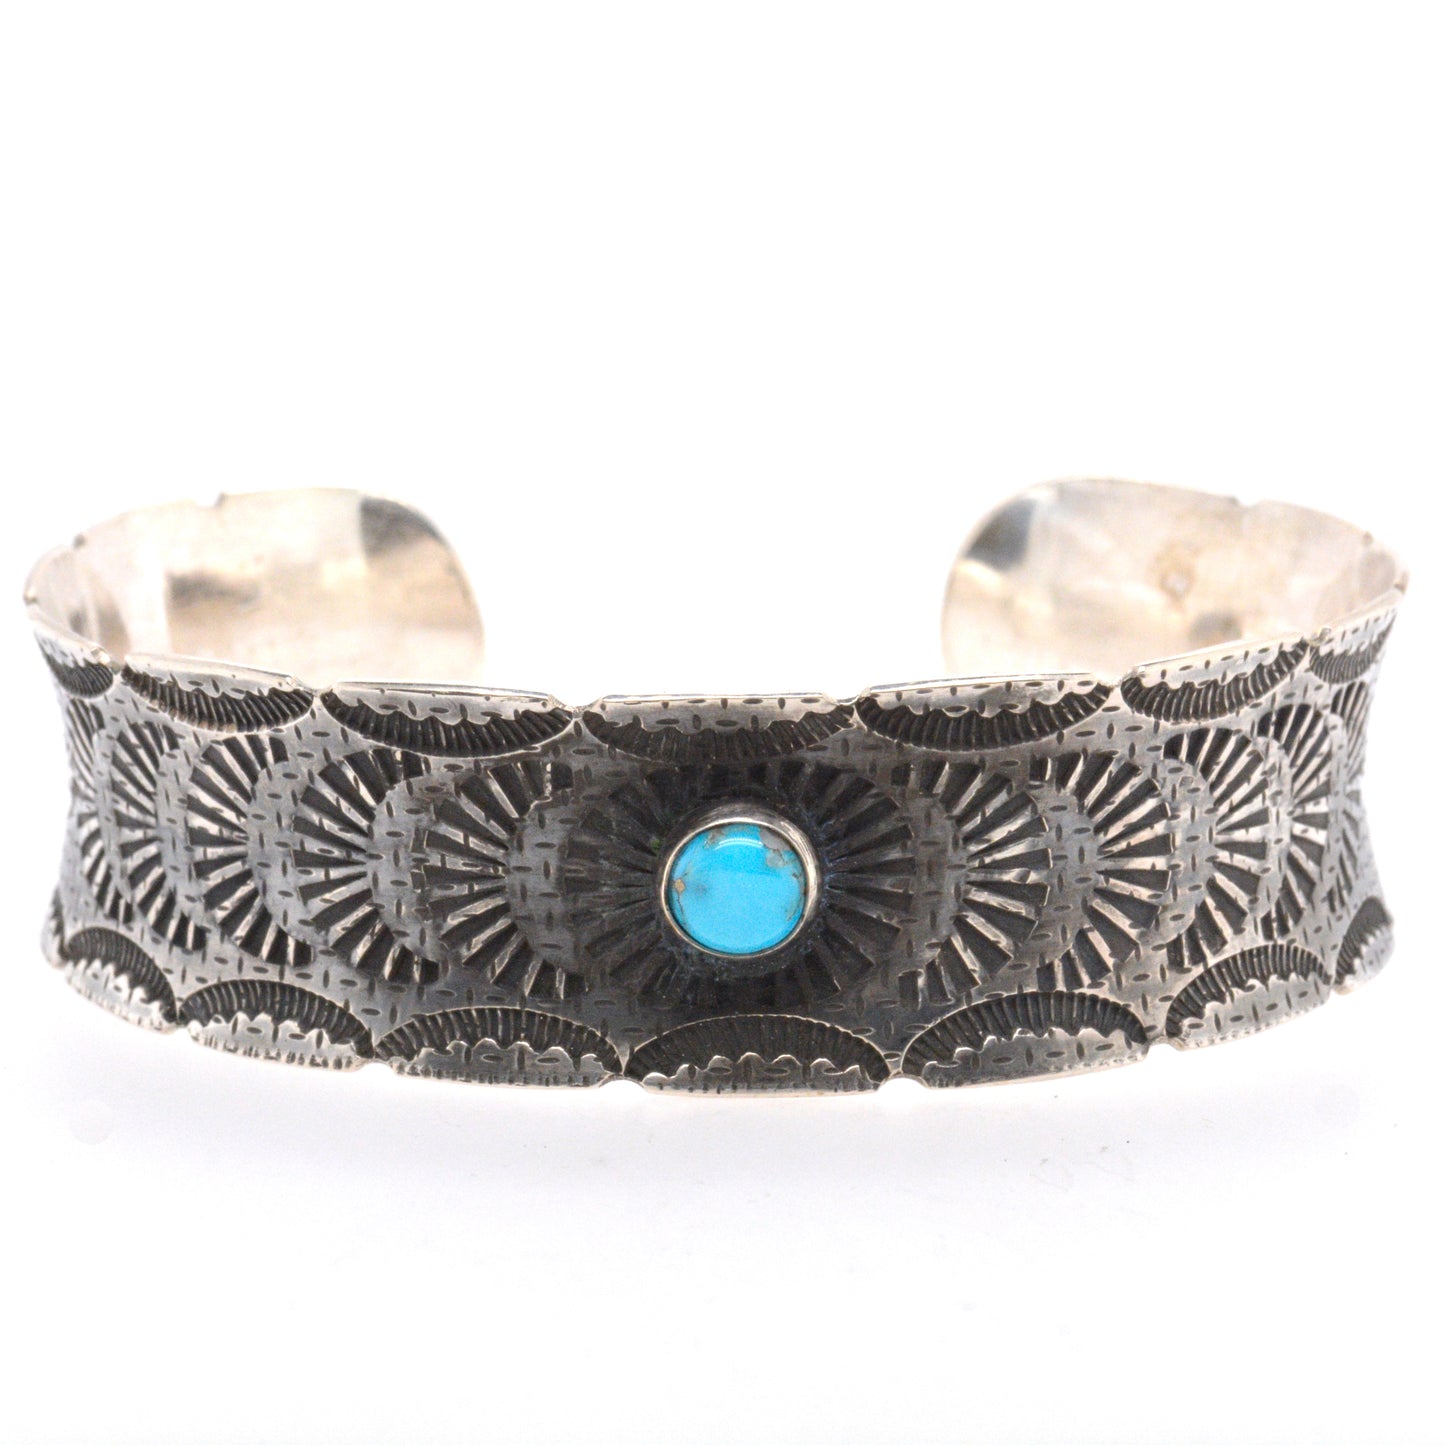 Blue Turquoise Bracelet with Hand Stamped Finish